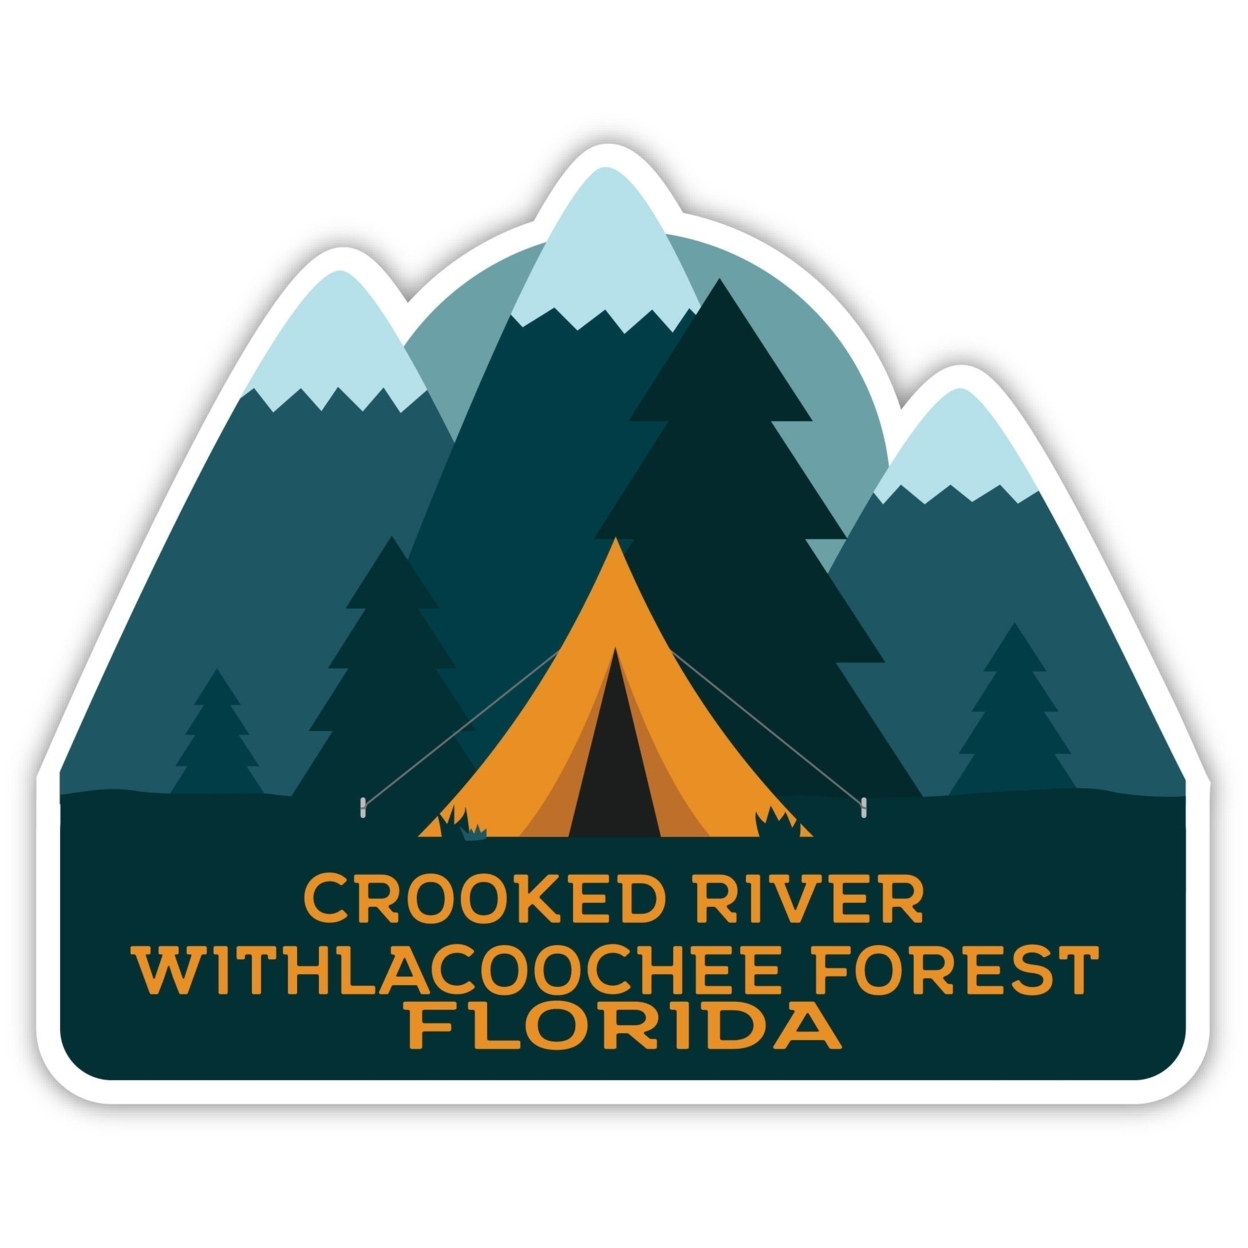 Crooked River Withlacoochee Forest Florida Souvenir Decorative Stickers (Choose Theme And Size) - Single Unit, 8-Inch, Tent